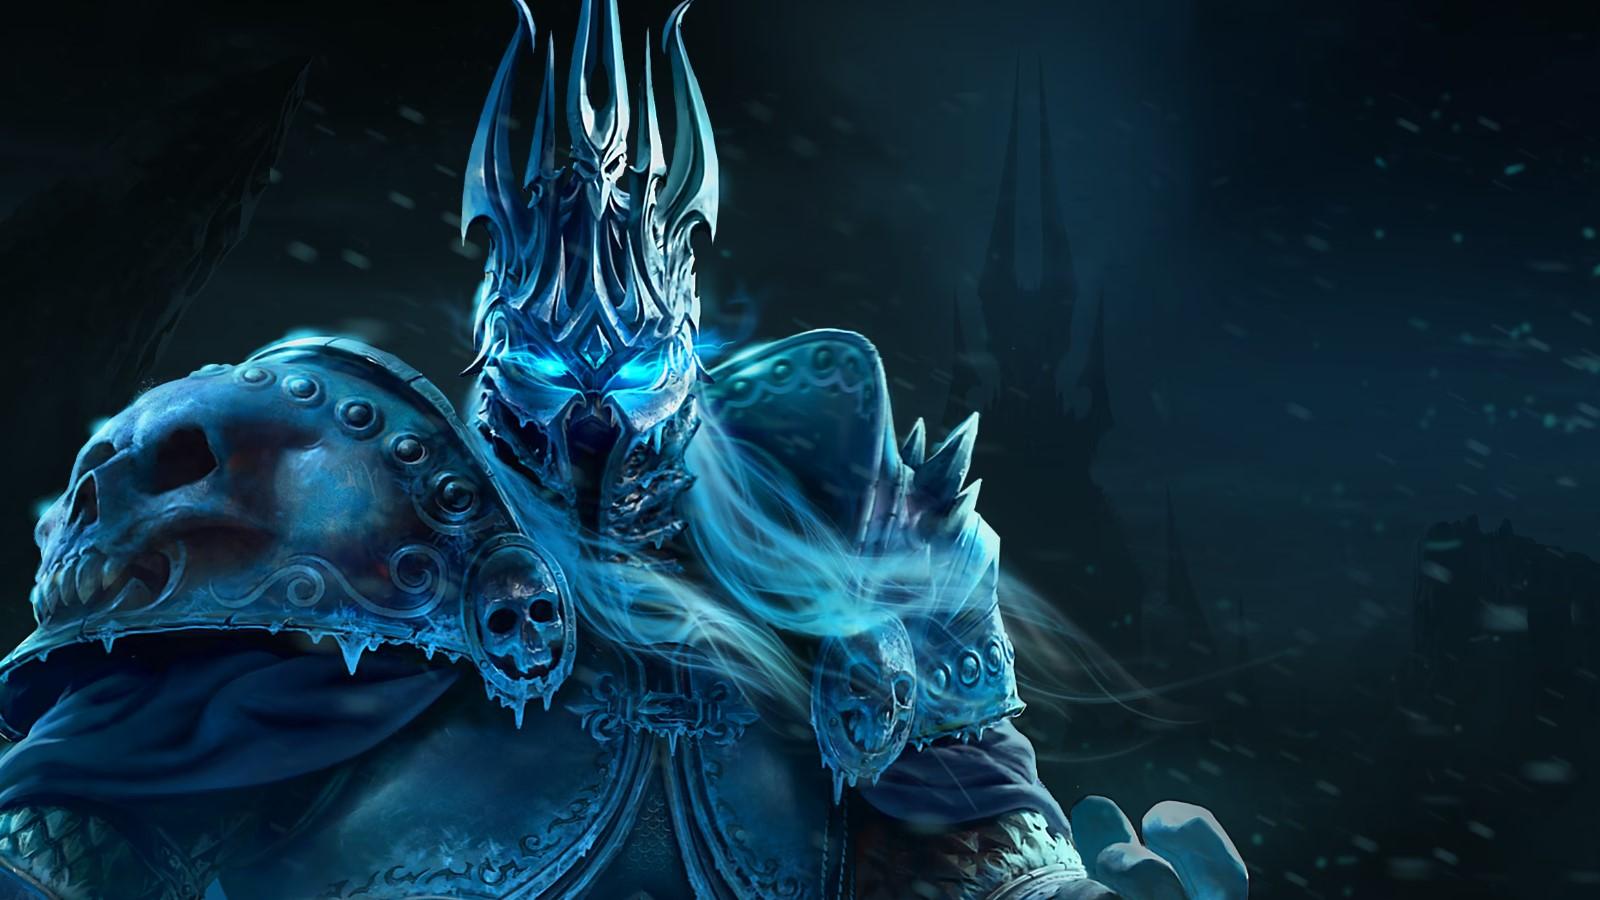 The Lich King, ruler of the Death Knights